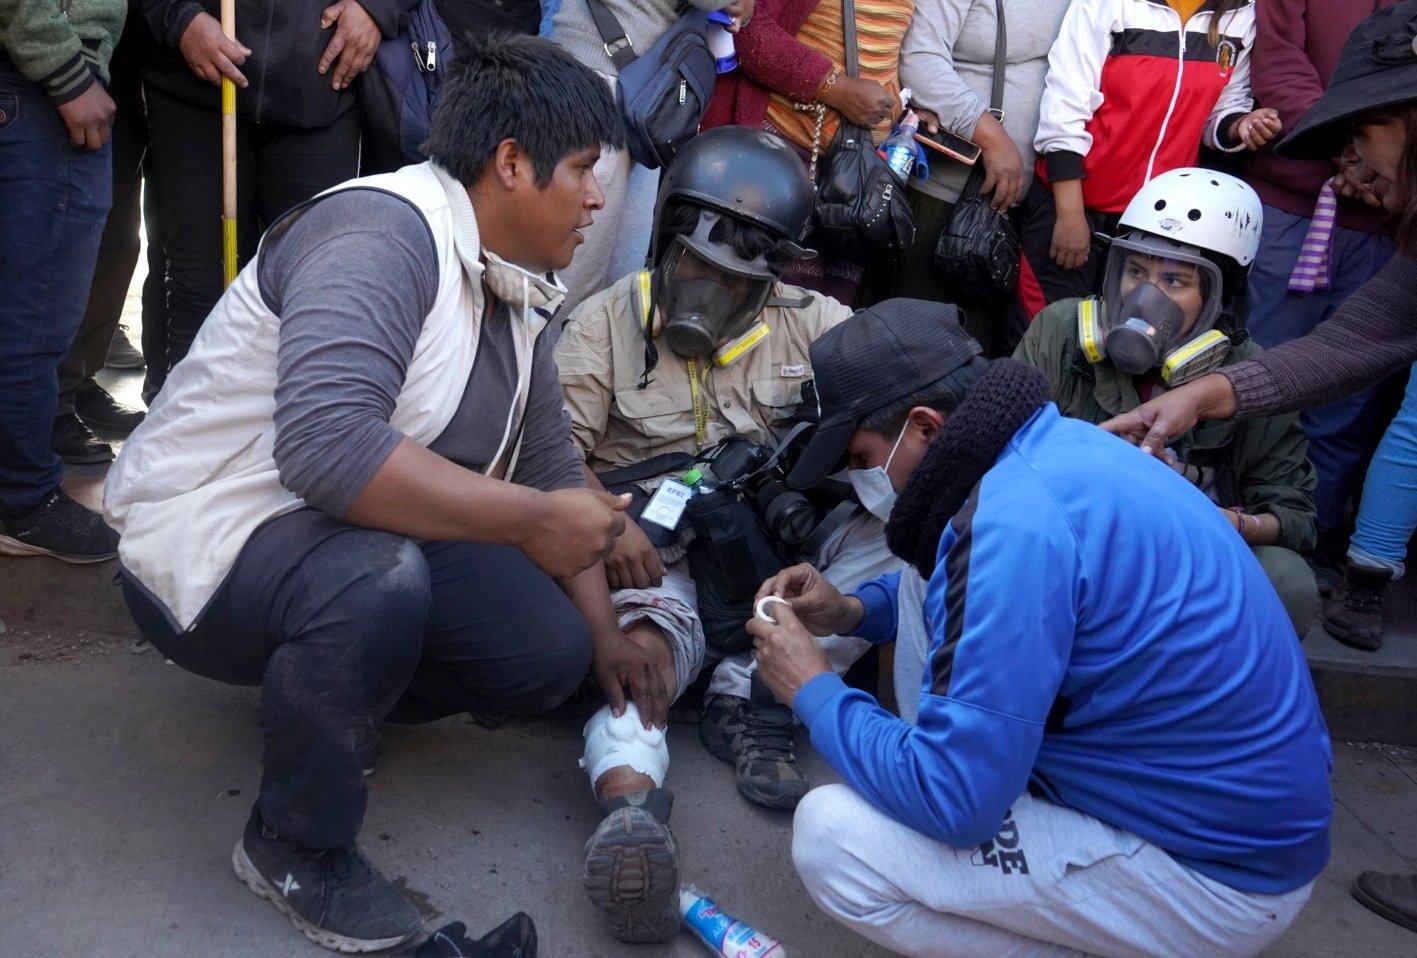 Photojournalist Aldair Mejia receives aid after being injured by a projectile during confrontations between protesters and police, in Juliaca, Peru, 7 Jan. 2023. (EPA Photo)